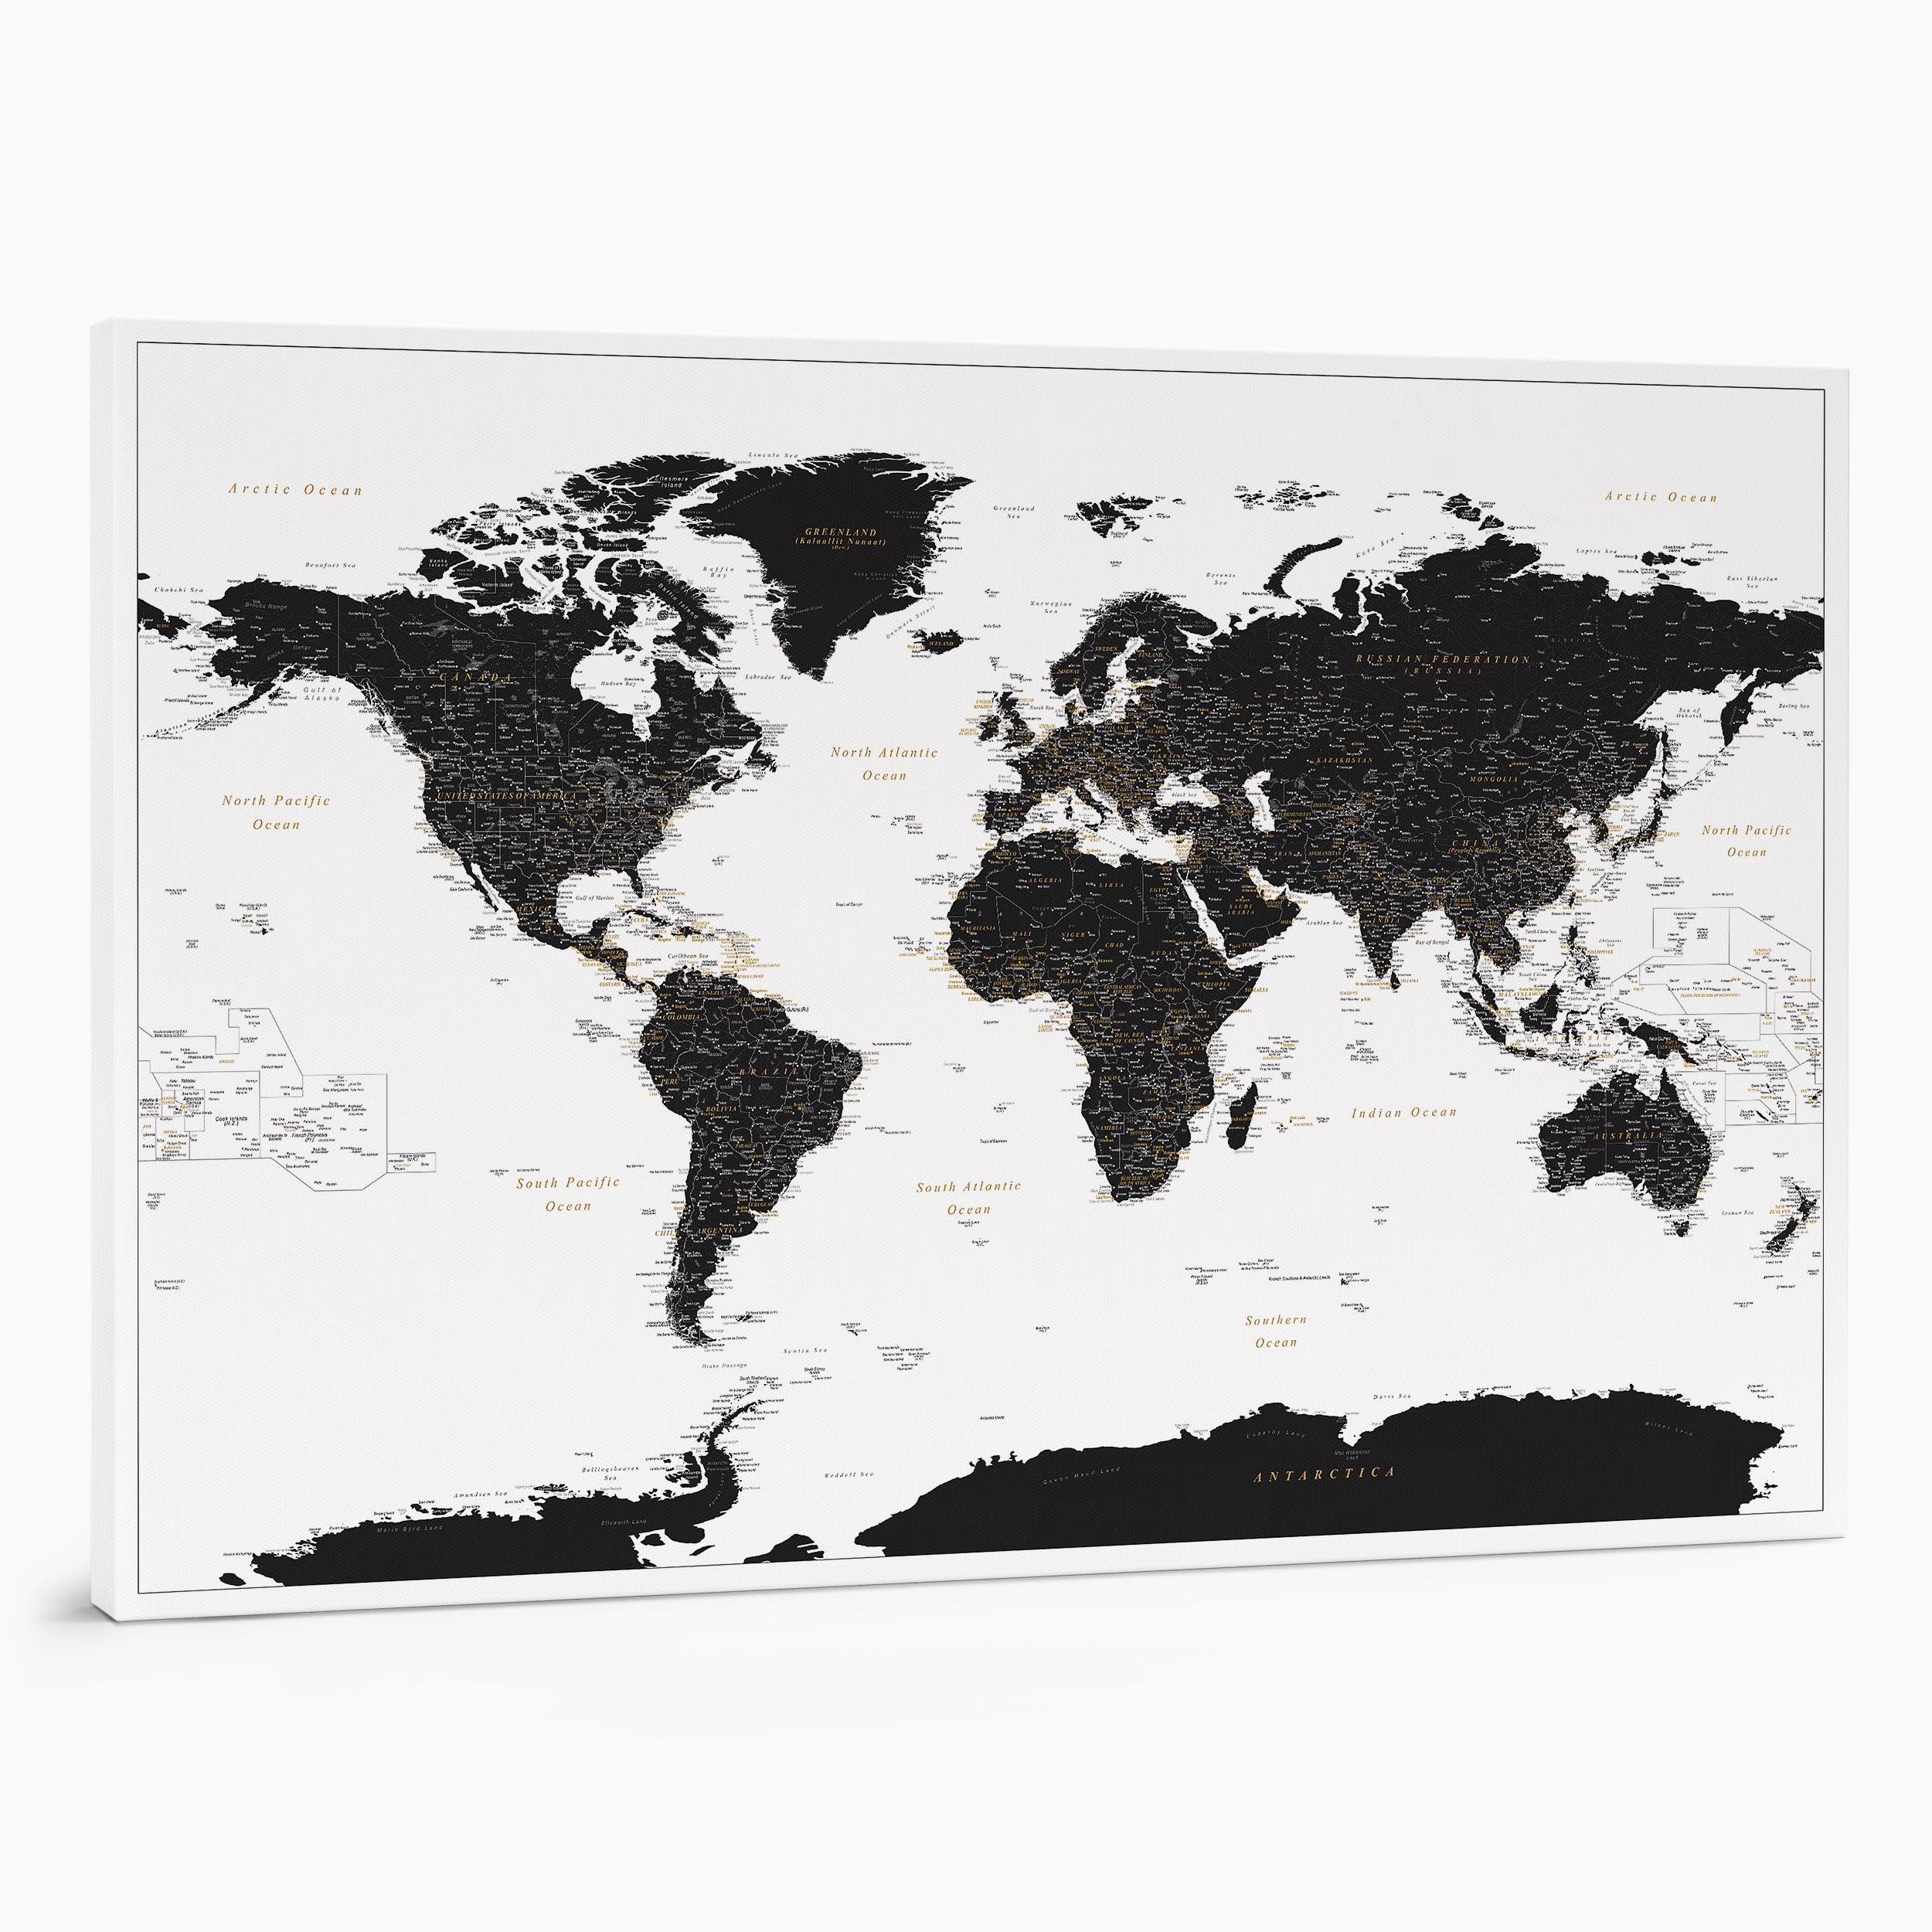 22P large push pin world map to track places visited on canvas black white